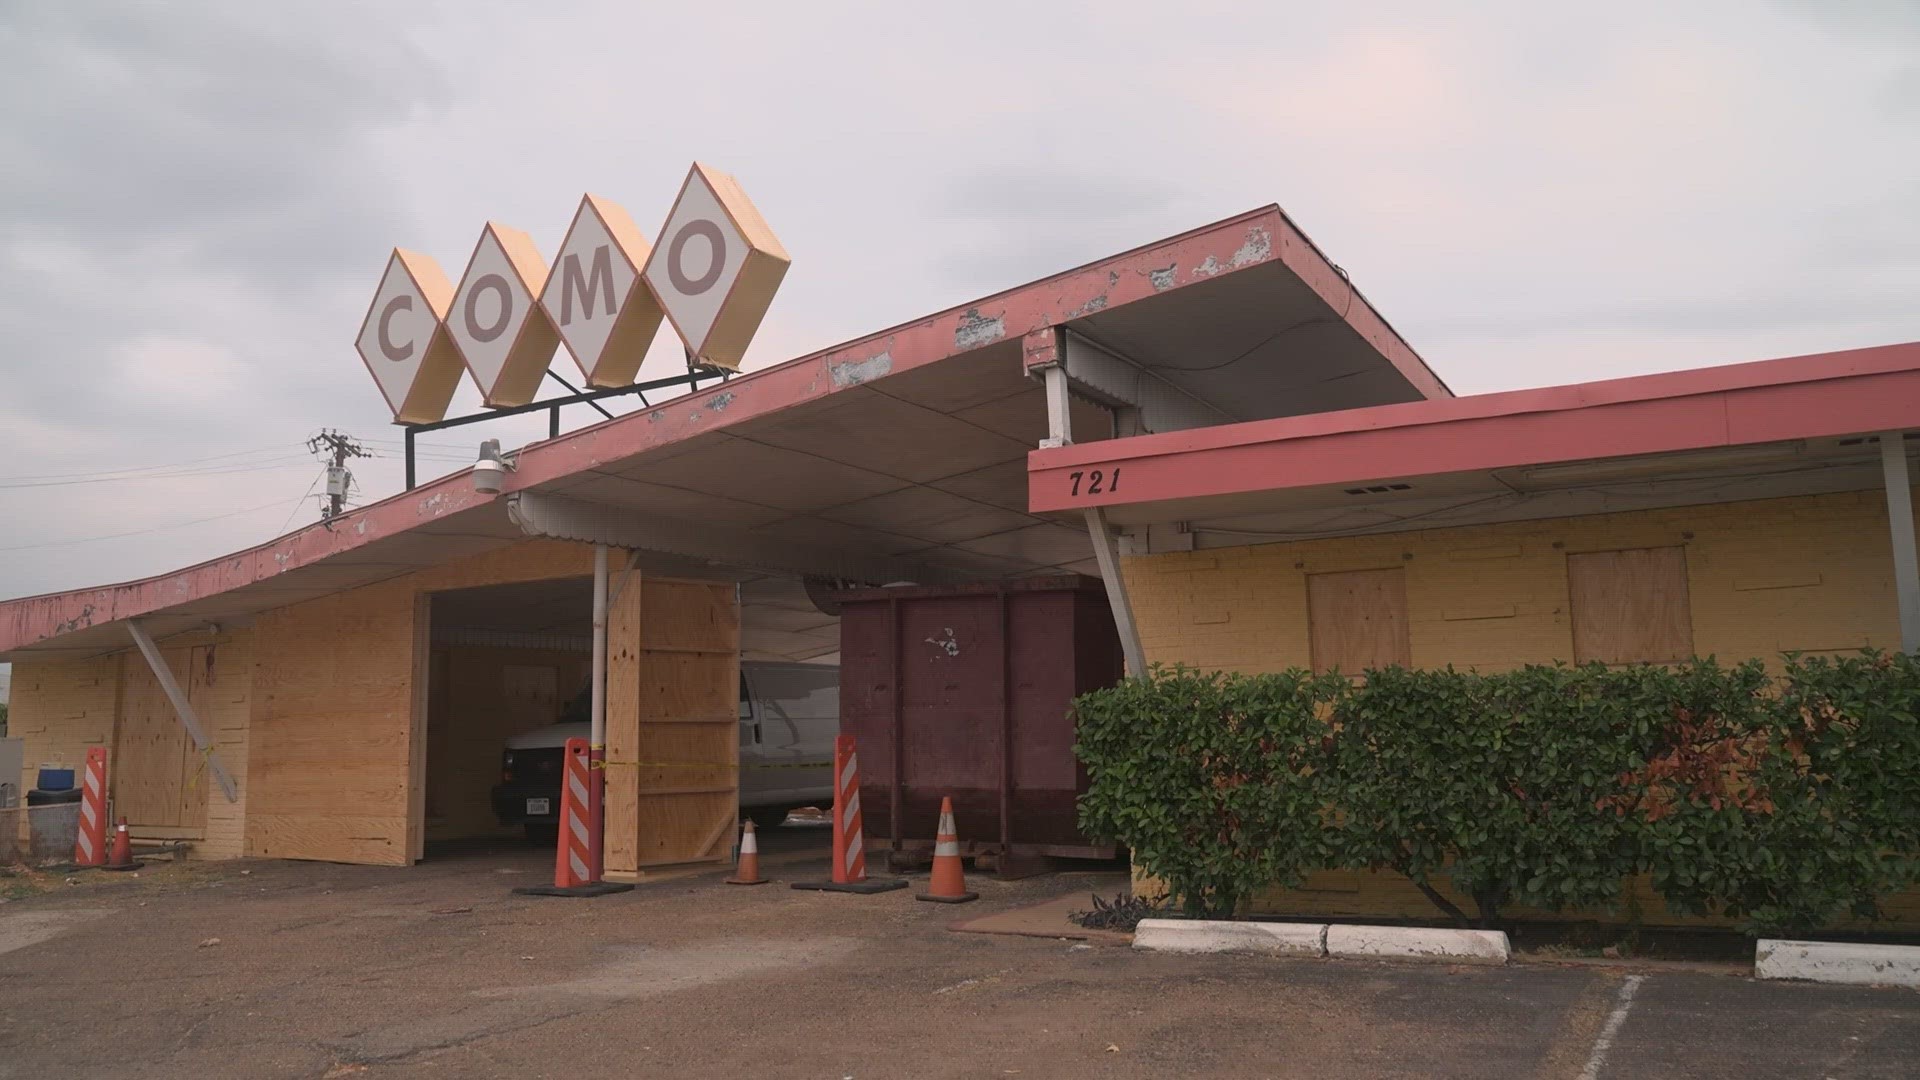 A large restaurant chain has purchased the historic Richardson motel, but what it plans to do with it is unclear.